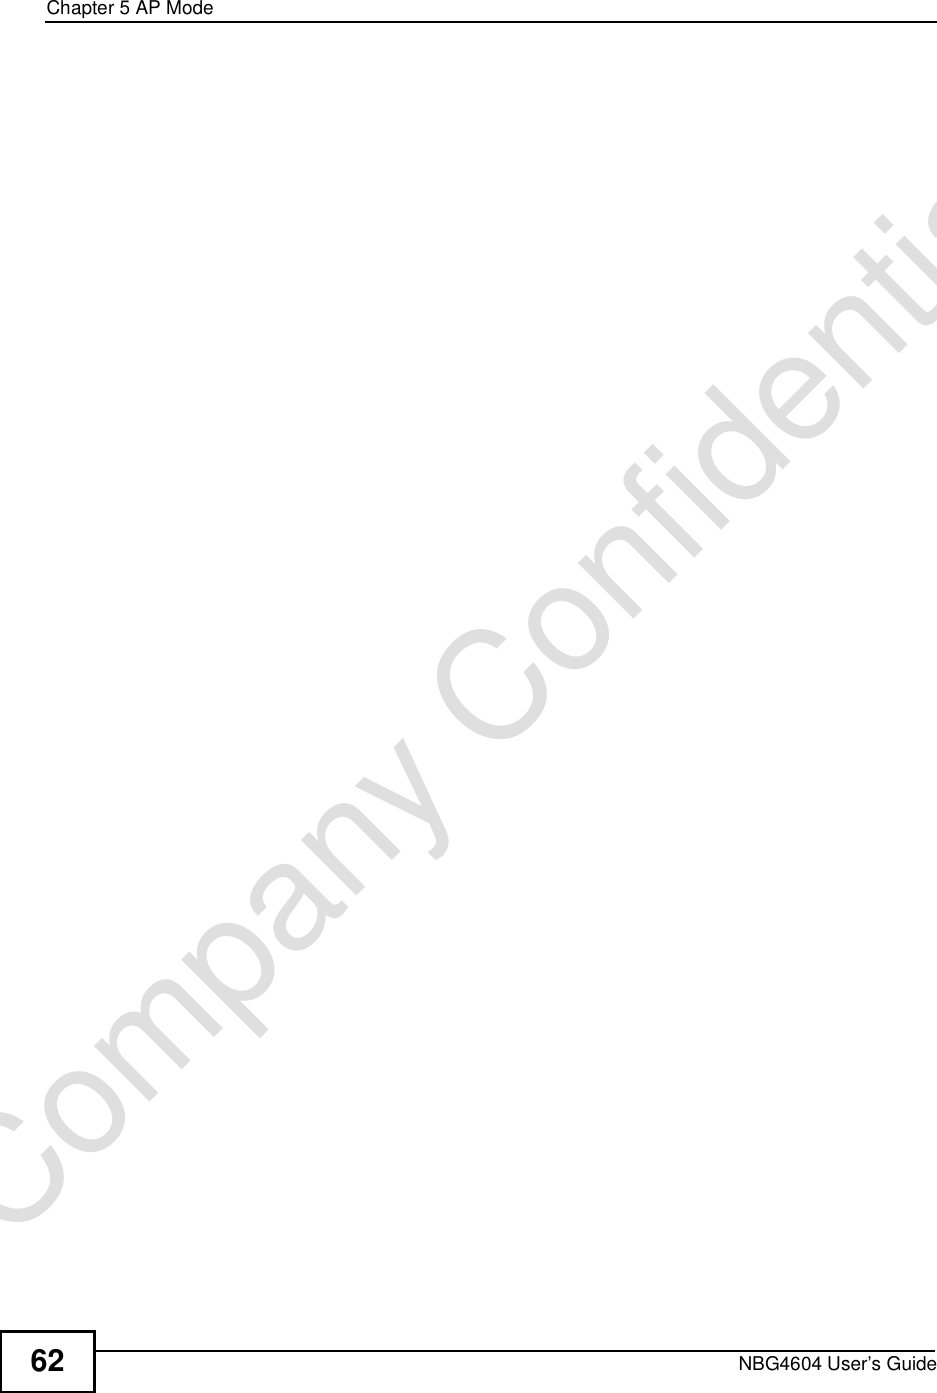 Chapter 5AP ModeNBG4604 User’s Guide62Company Confidential